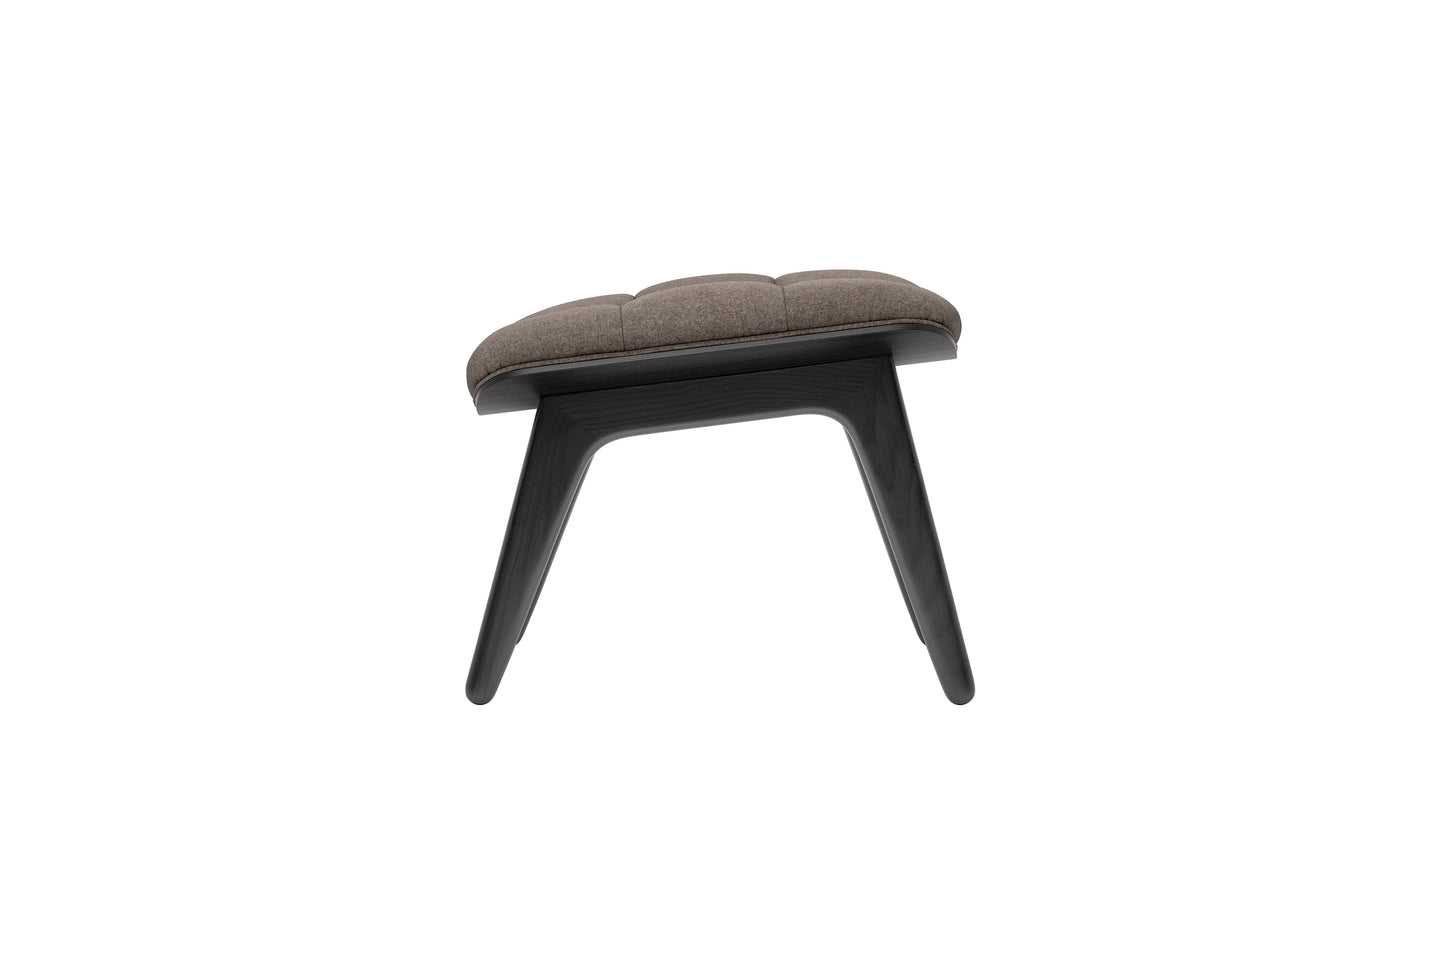 Mammoth Stool by NORR11